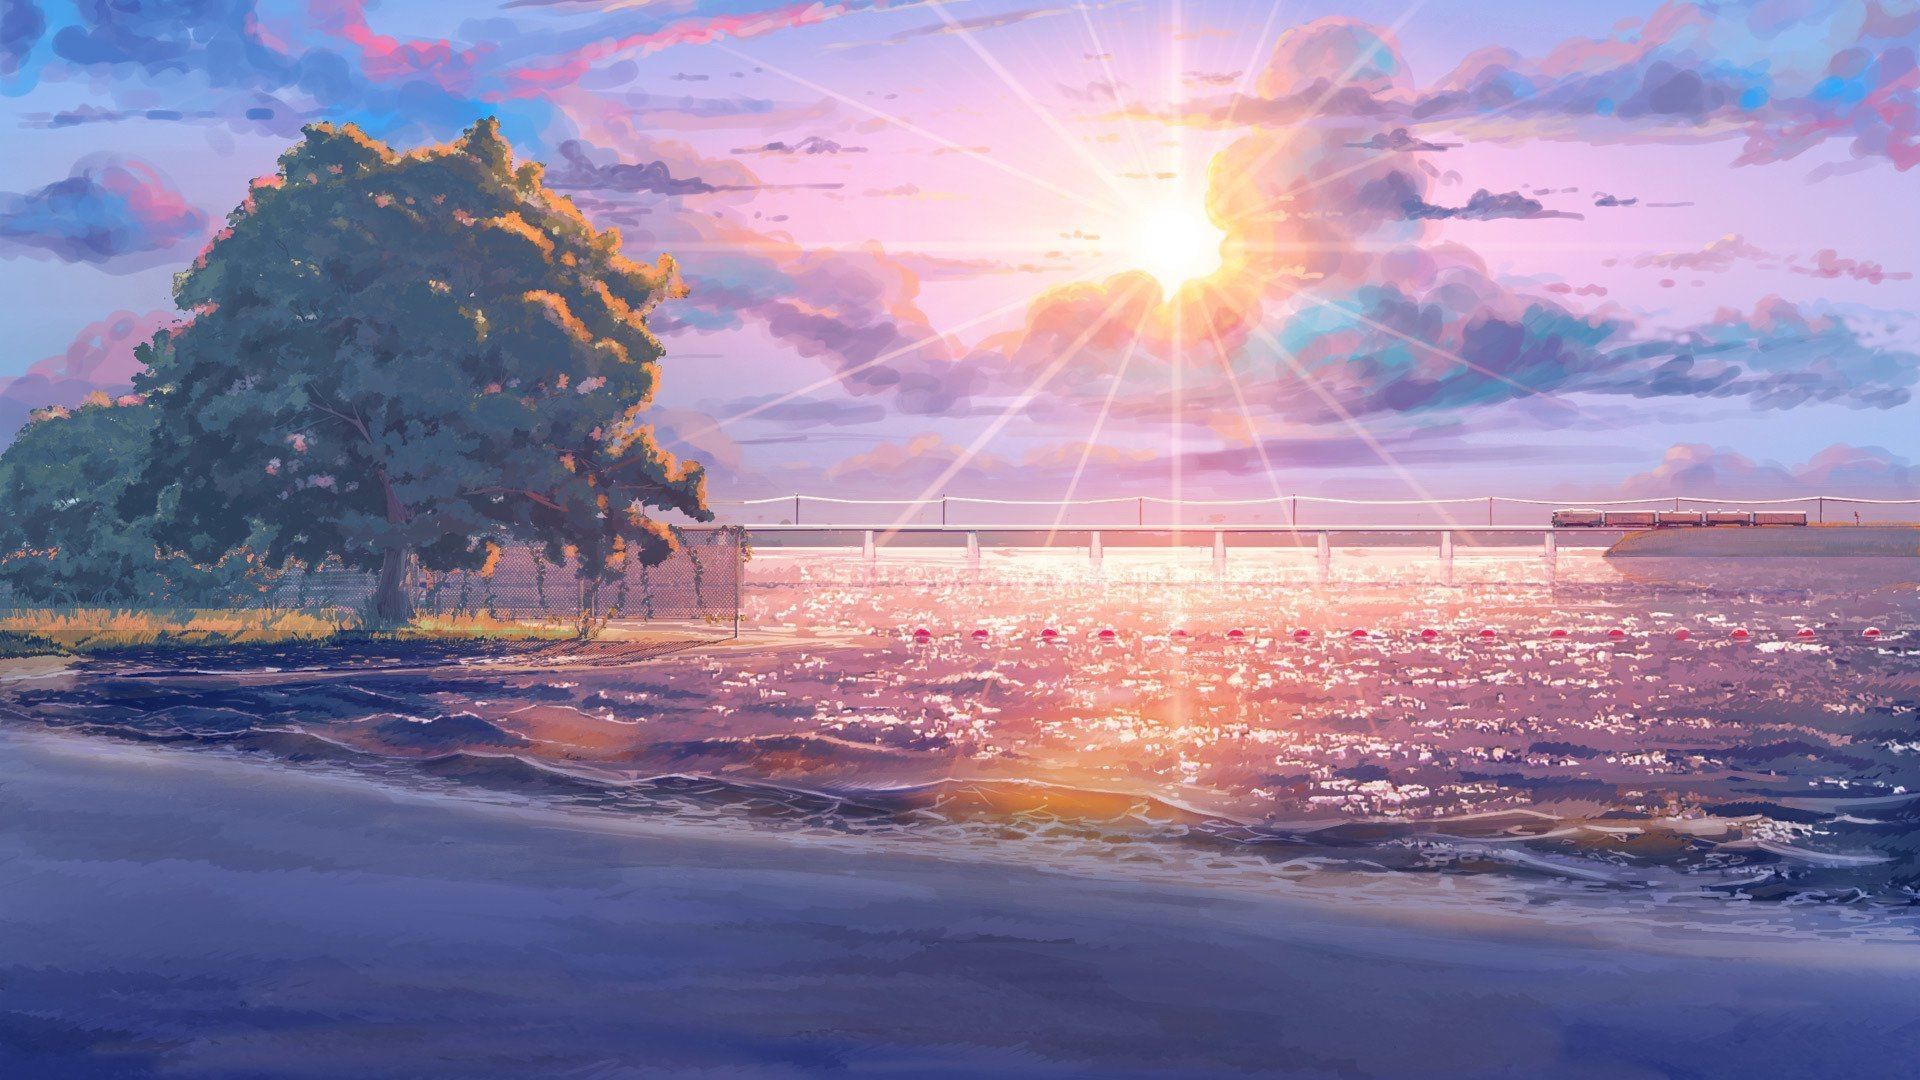 Anime Scenery Wallpaper (best Anime Scenery Wallpaper and image) on WallpaperChat